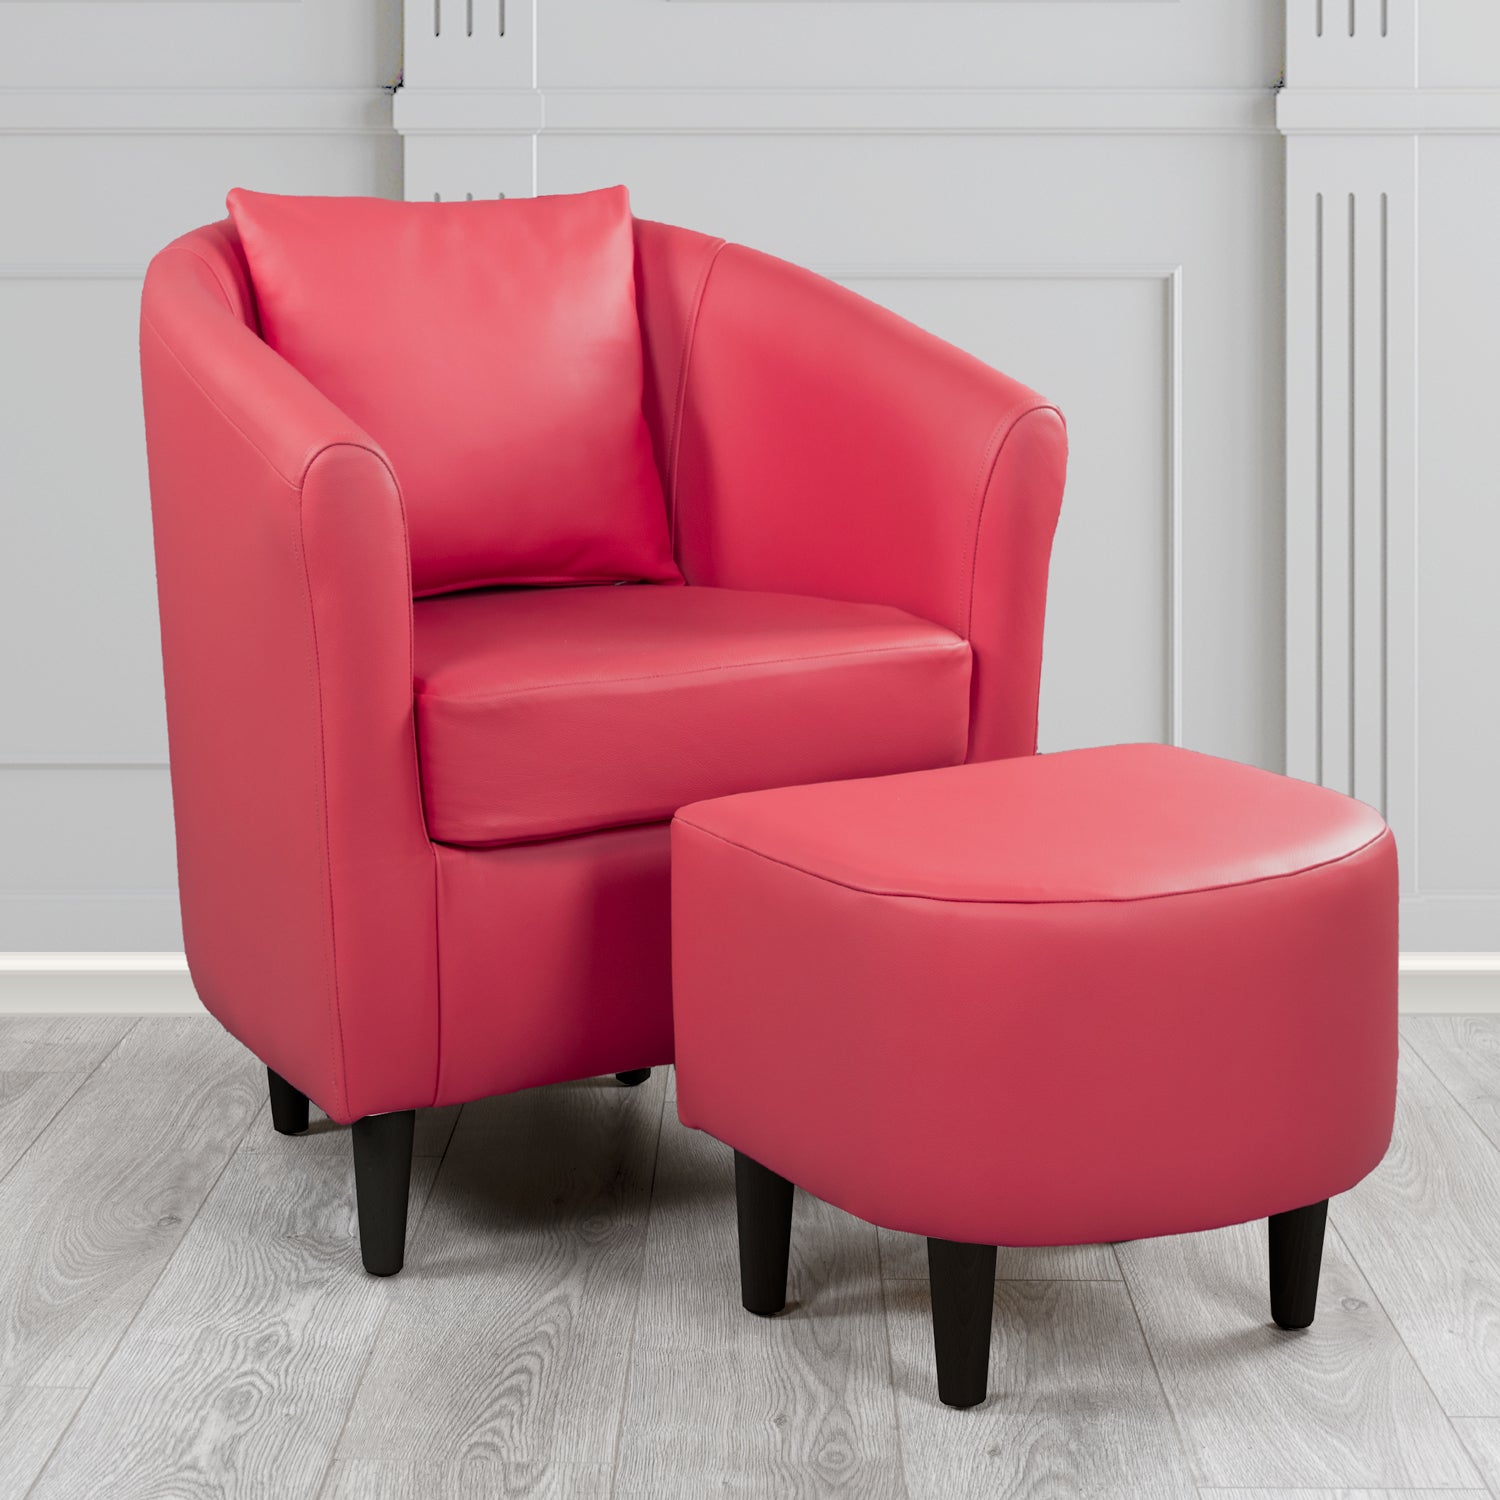 St Tropez Shelly Velvet Red Crib 5 Genuine Leather Tub Chair & Footstool Set With Scatter Cushion (6619544682538)